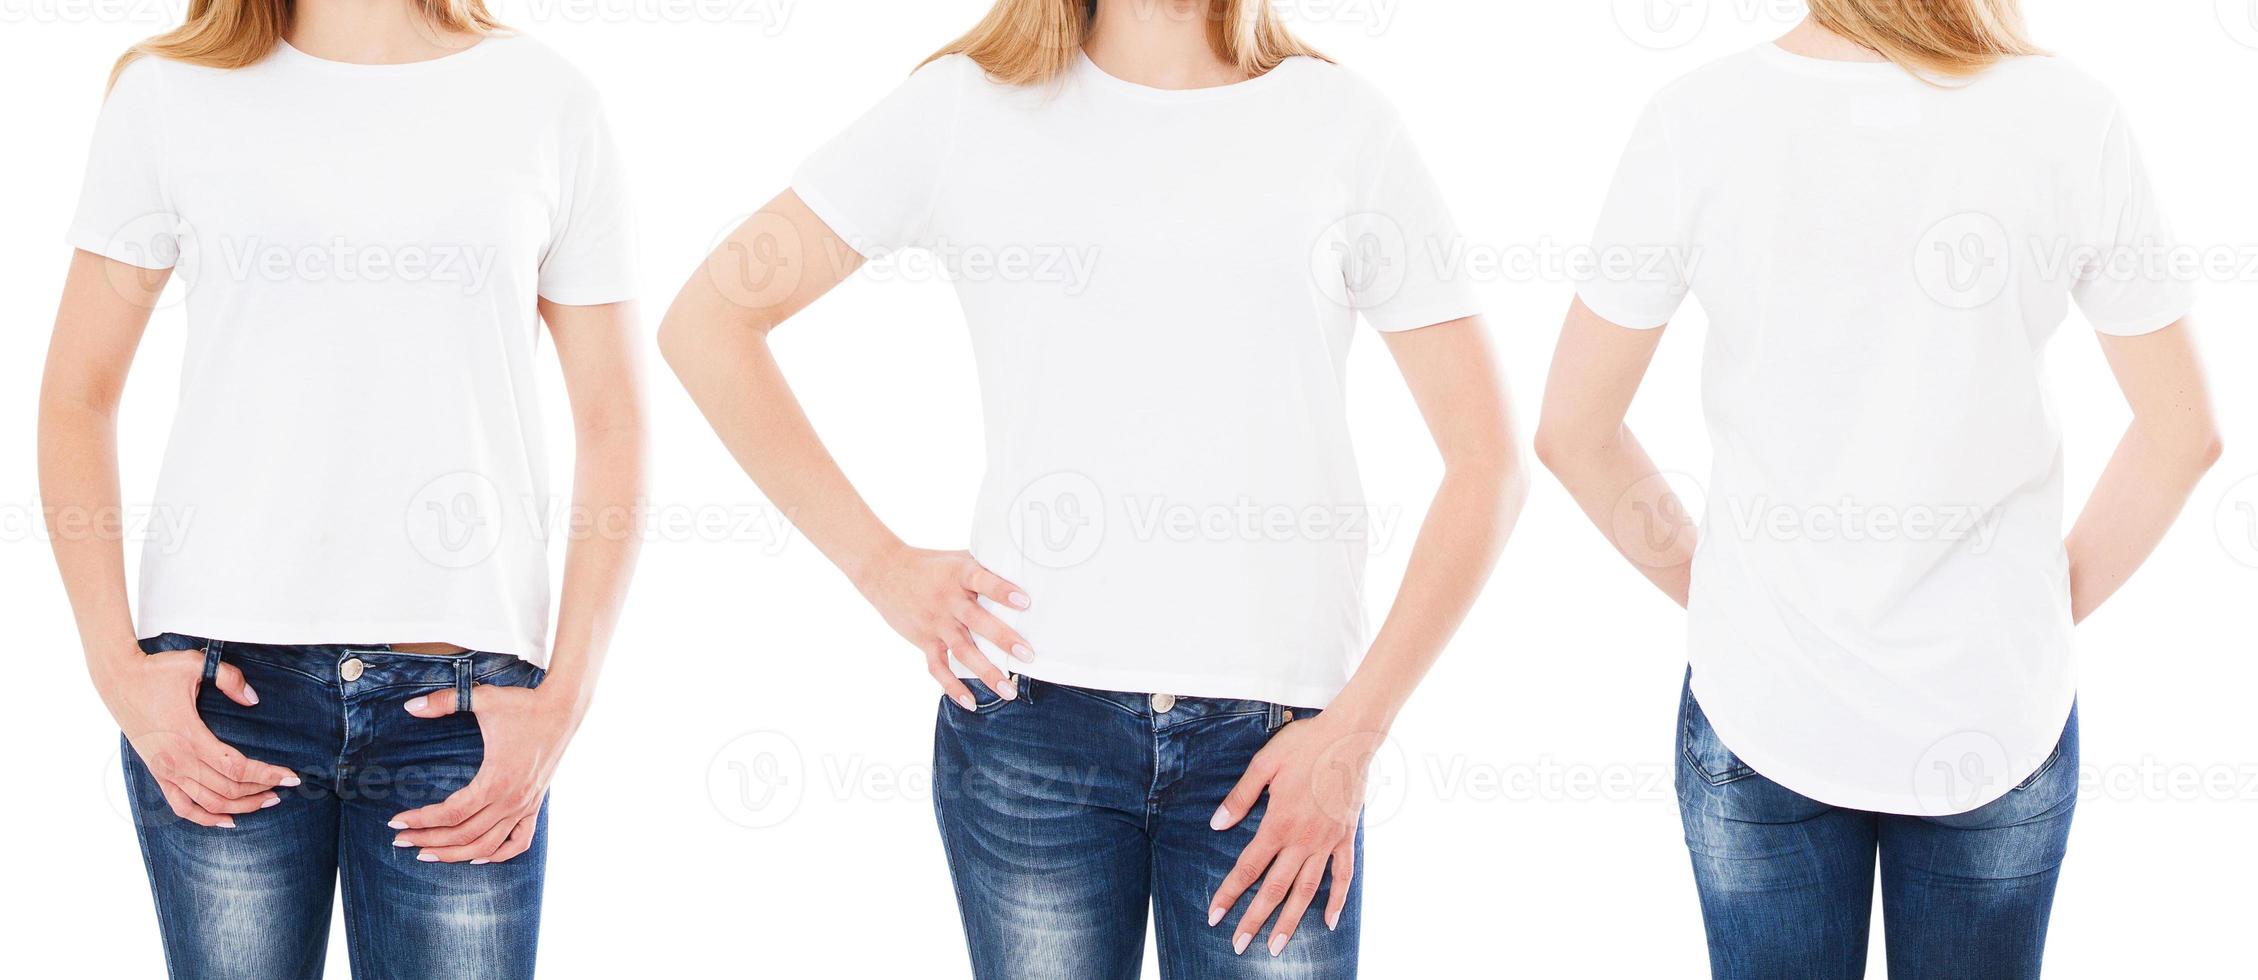 woman t-shirt front and back views isolated on white background - cropped image photo